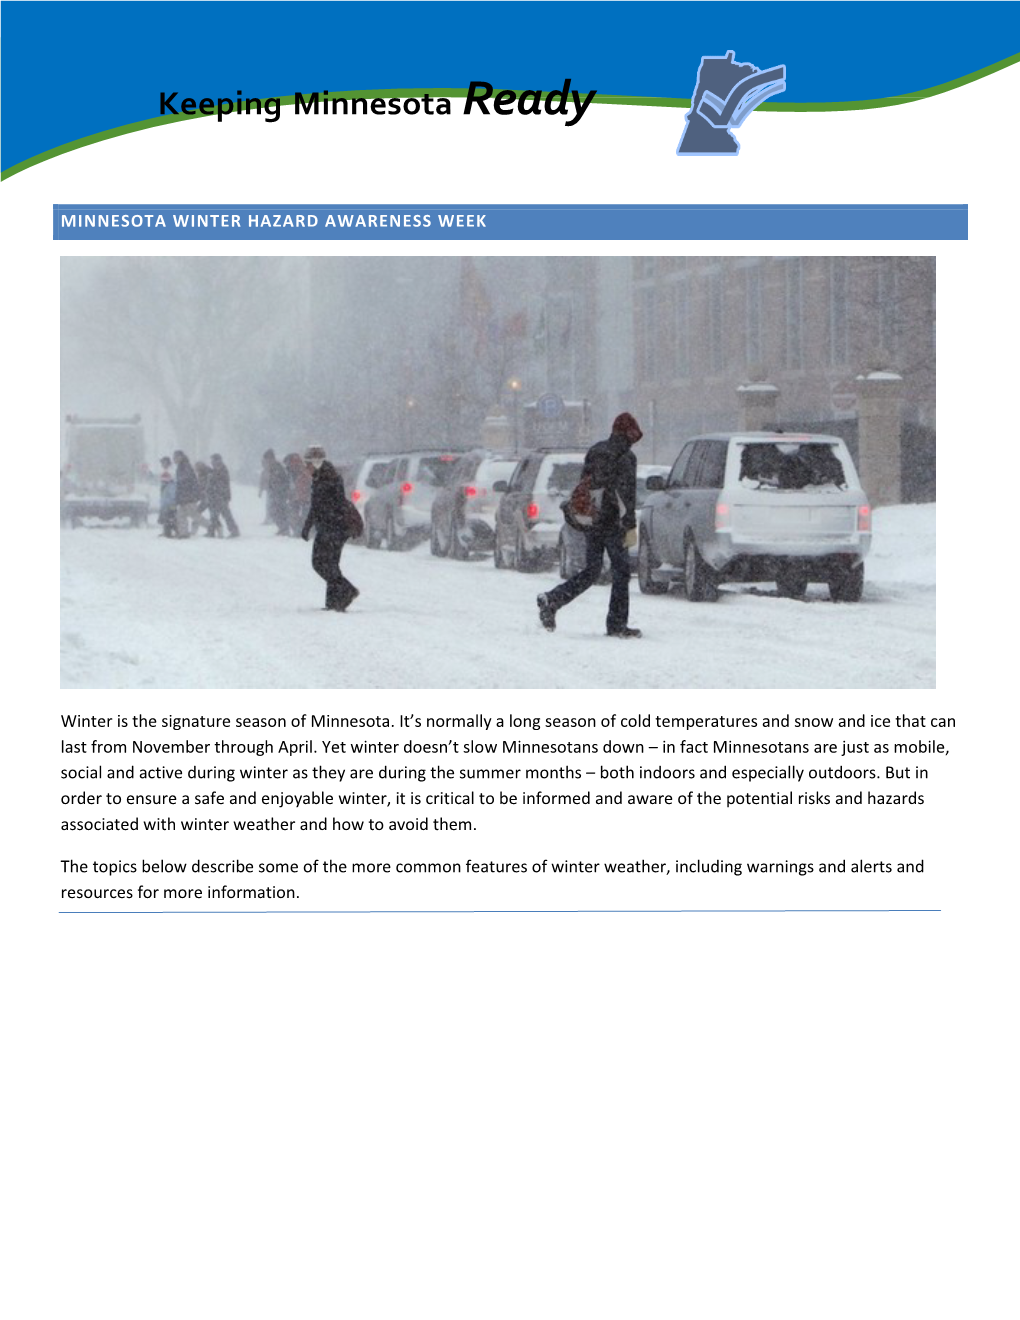 WINTER STORMS: HOW WINTER STORMS FORM There Are Many Ways for Winter Storms to Form; However, All Have Three Key Components